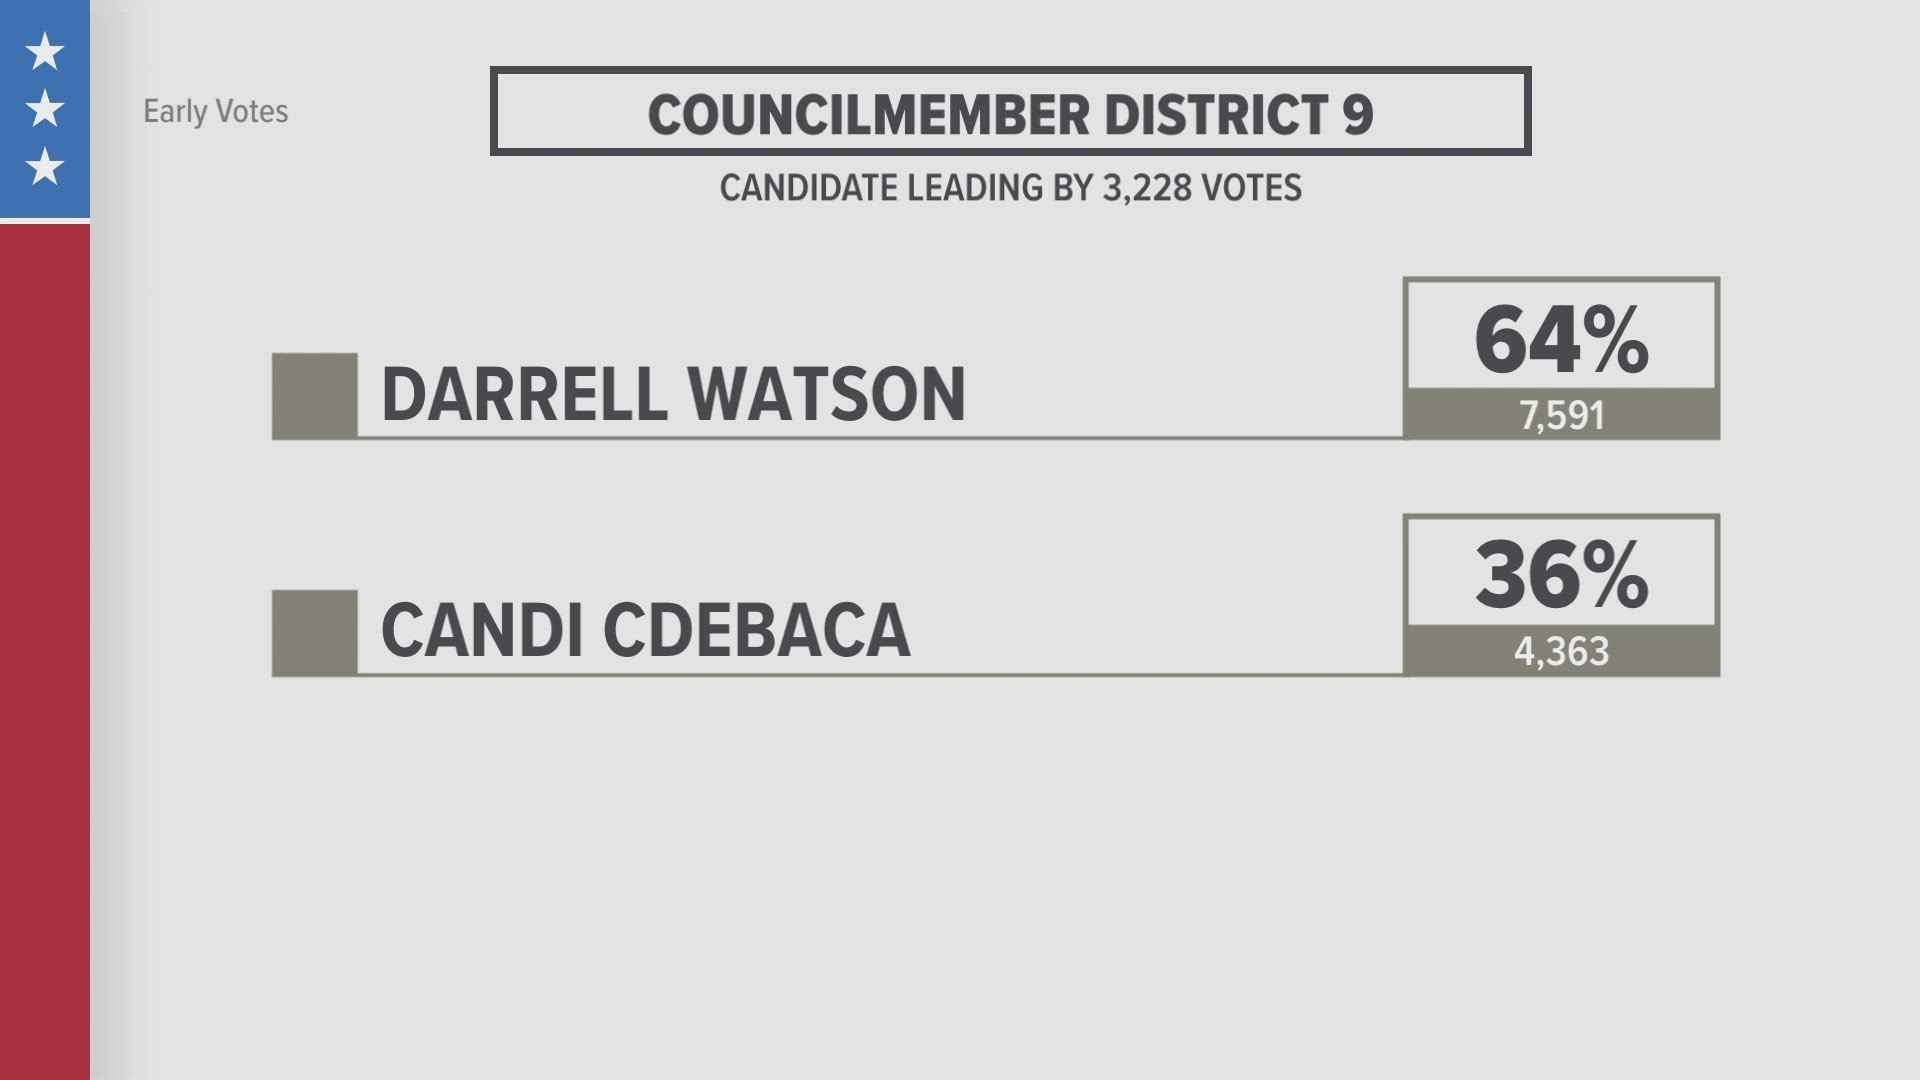 Tuesday's runoff election determined the winners of city council seats in Districts 8, 9 and 10.